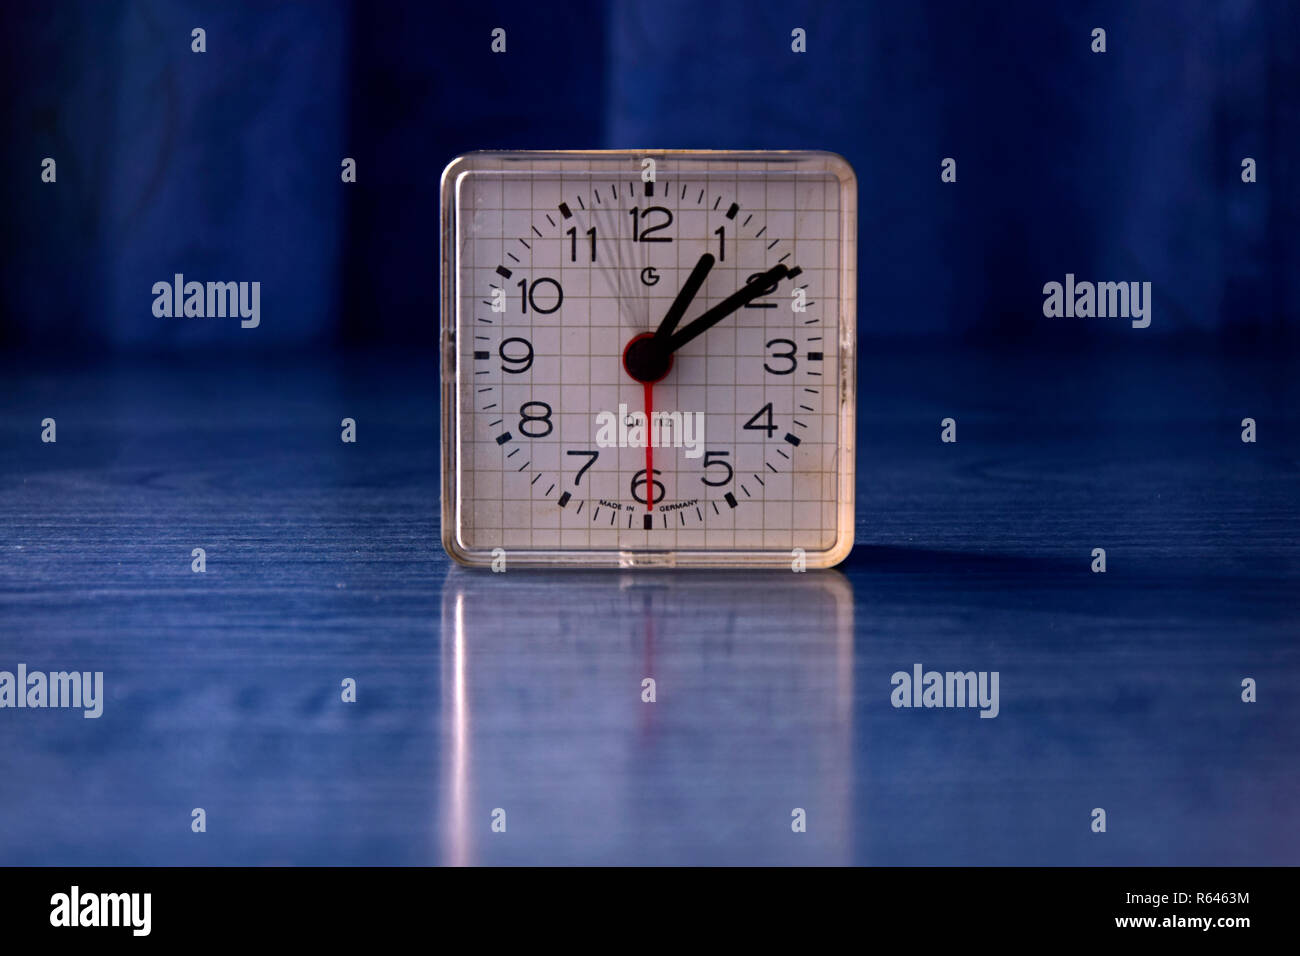 Analog quartz clock showing in 5 second exposure by time lapse the moving of the second hand, close-up in blue environment Stock Photo